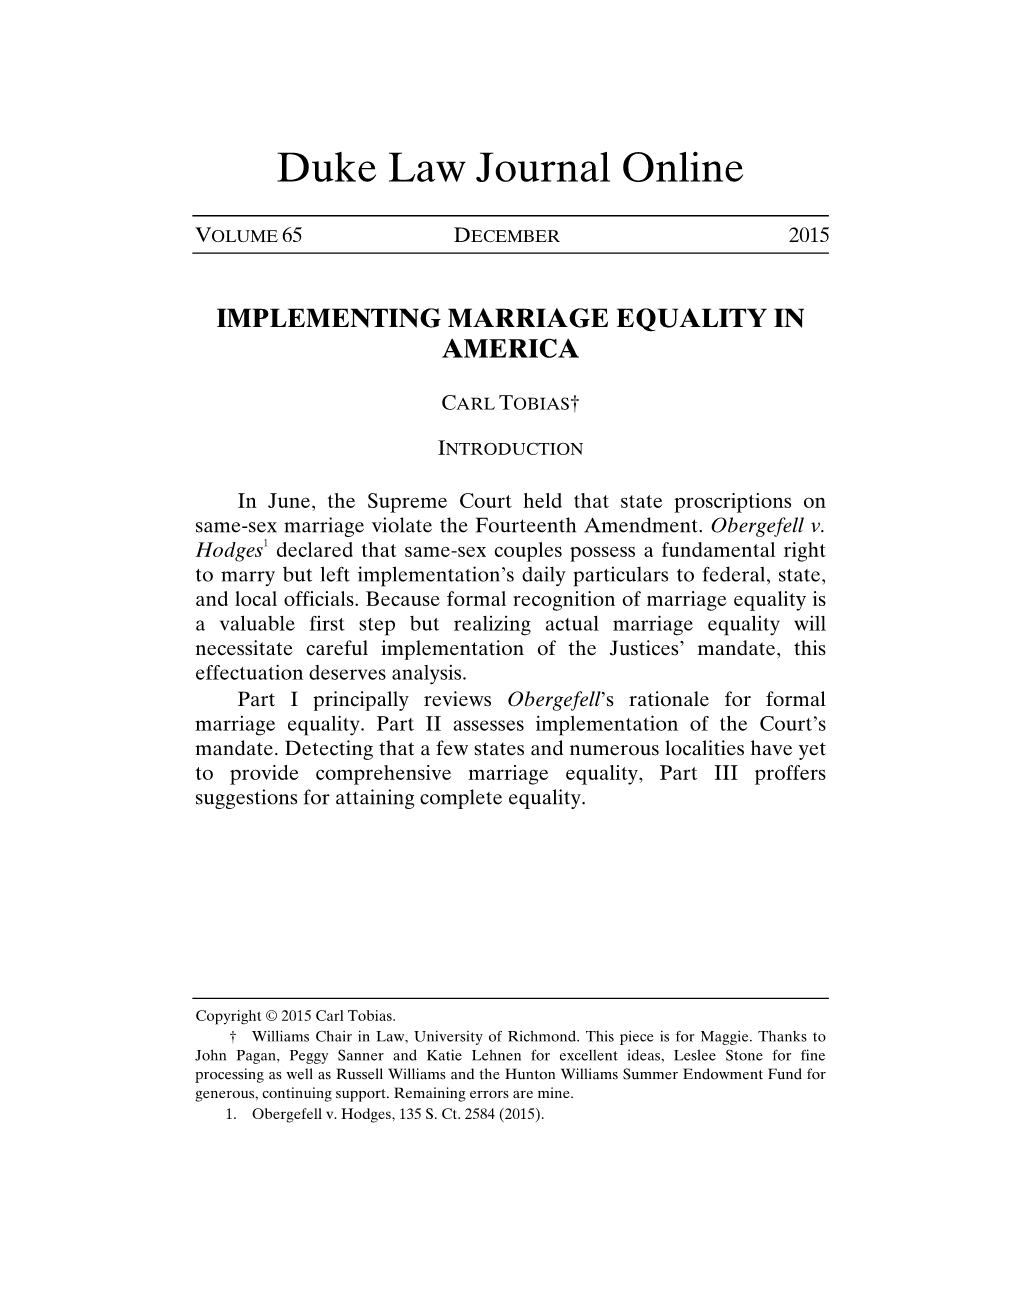 Implementing Marriage Equality in America